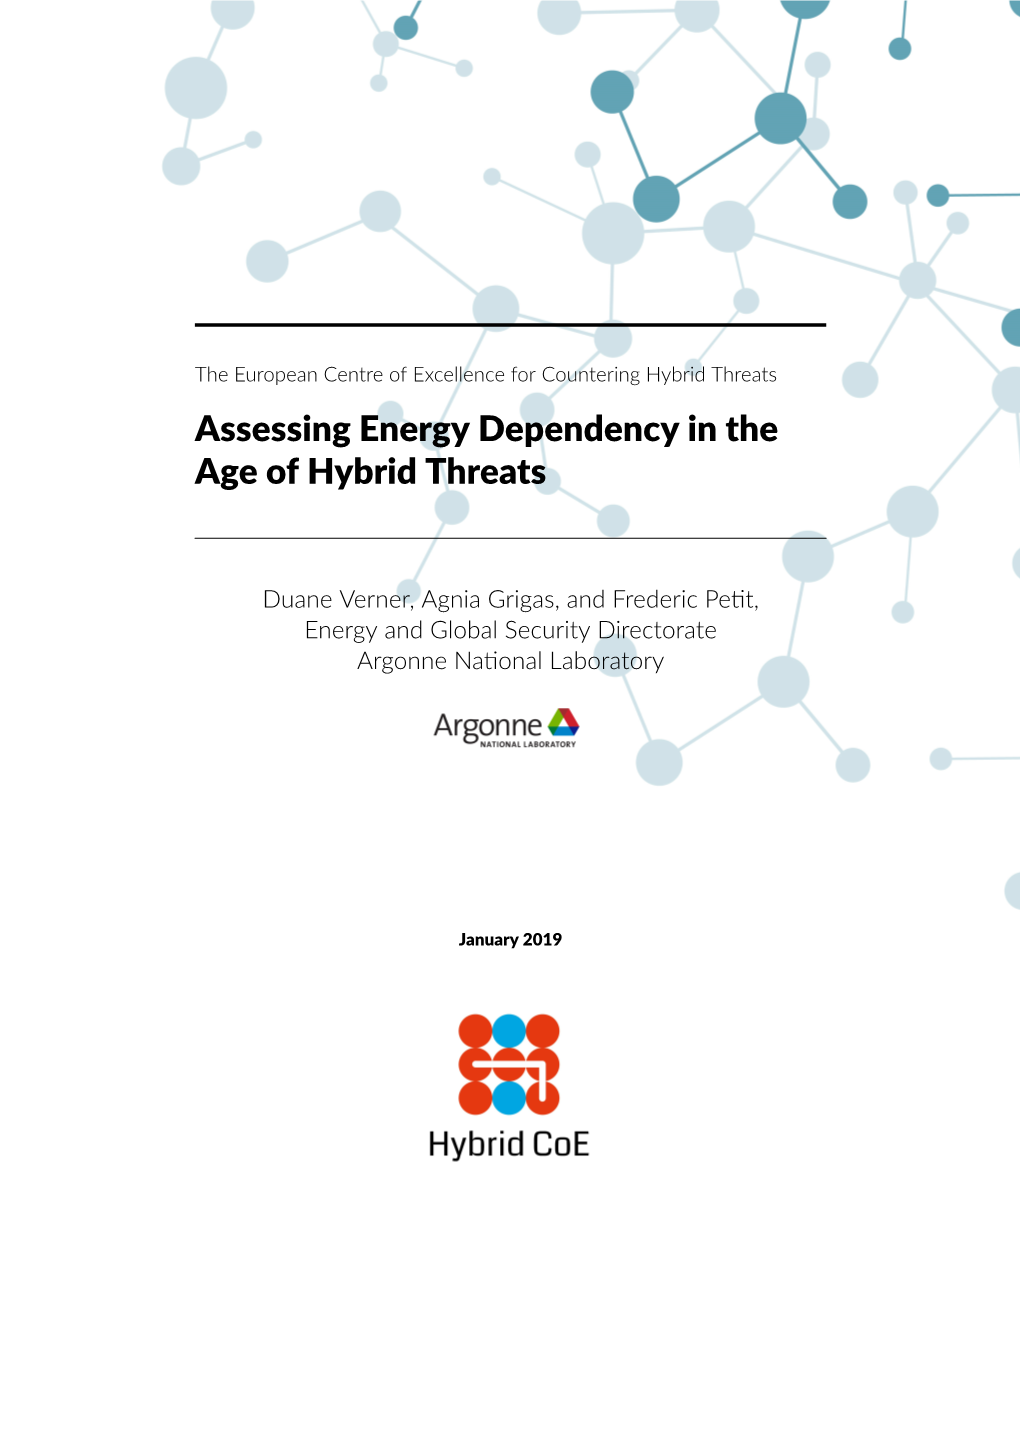 Assessing Energy Dependency in the Age of Hybrid Threats